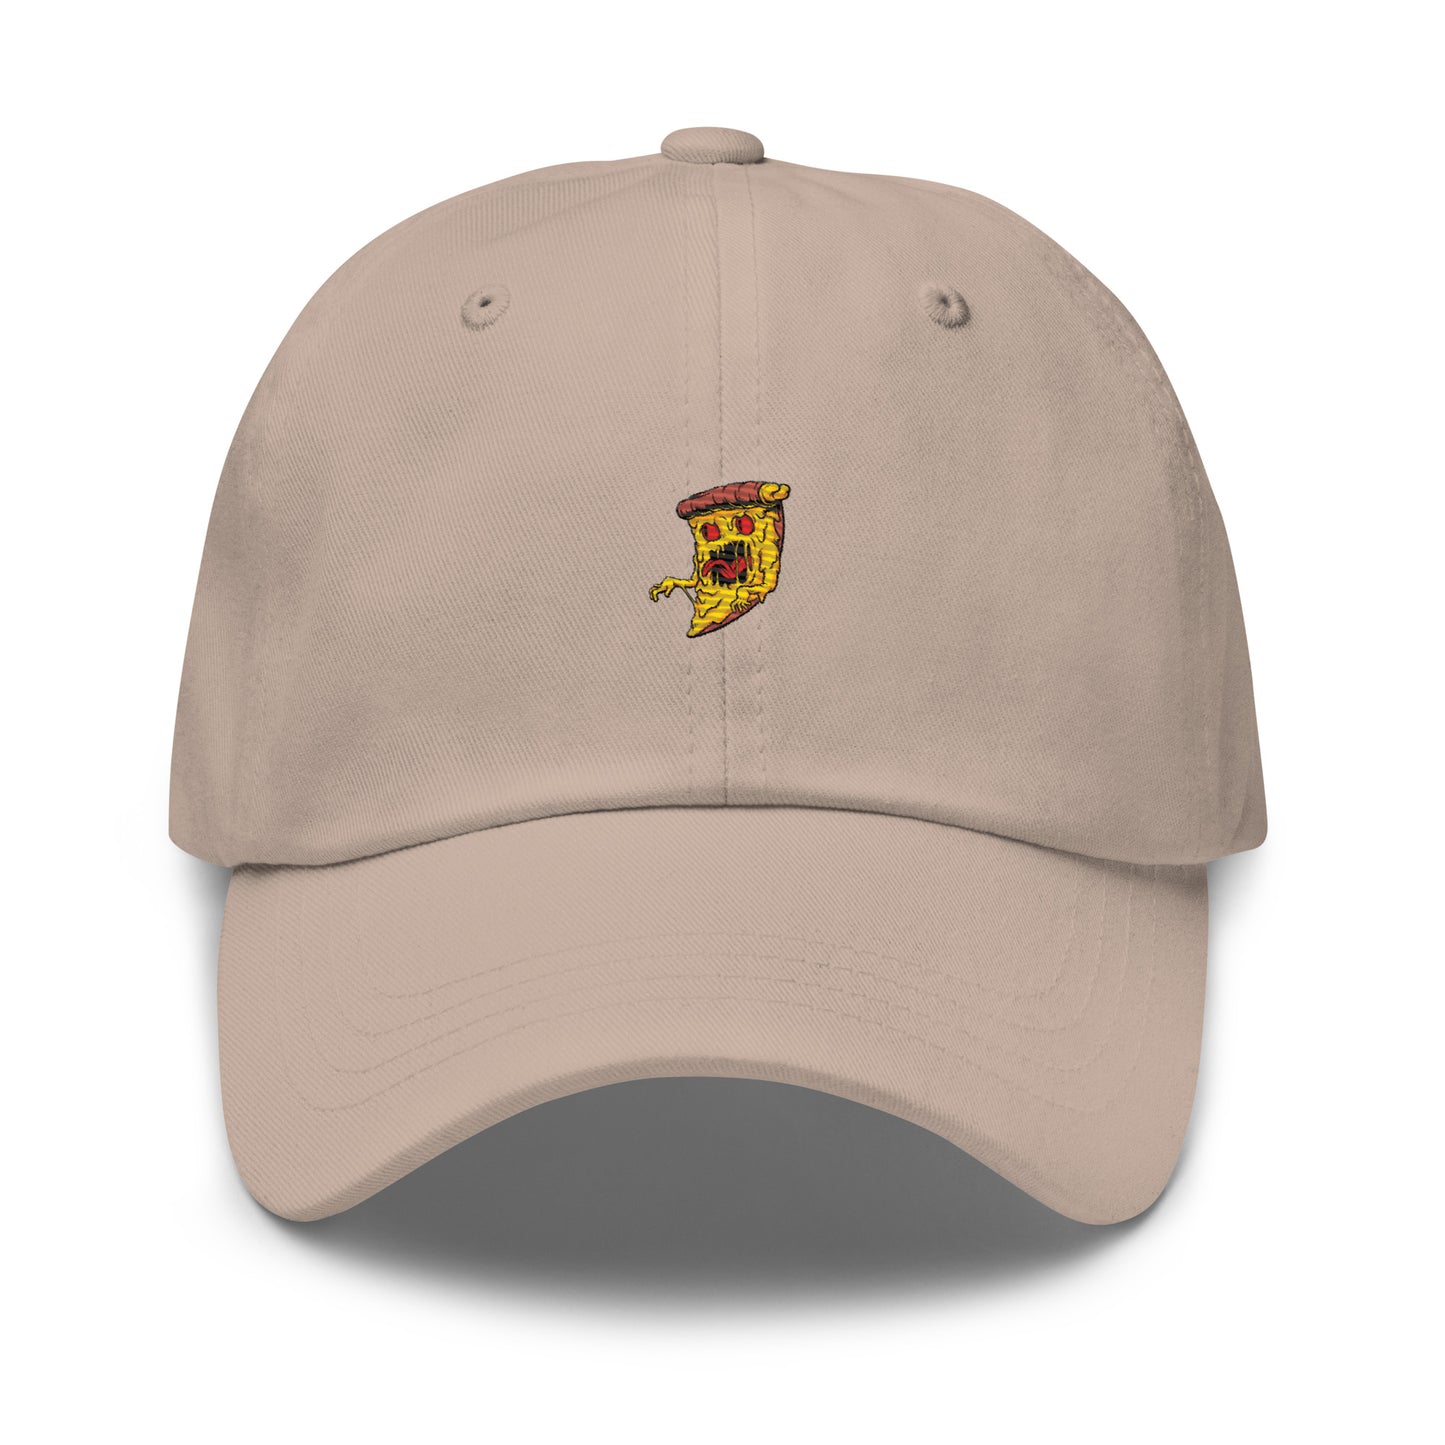 Dad Cap with Pizza Monster Symbol